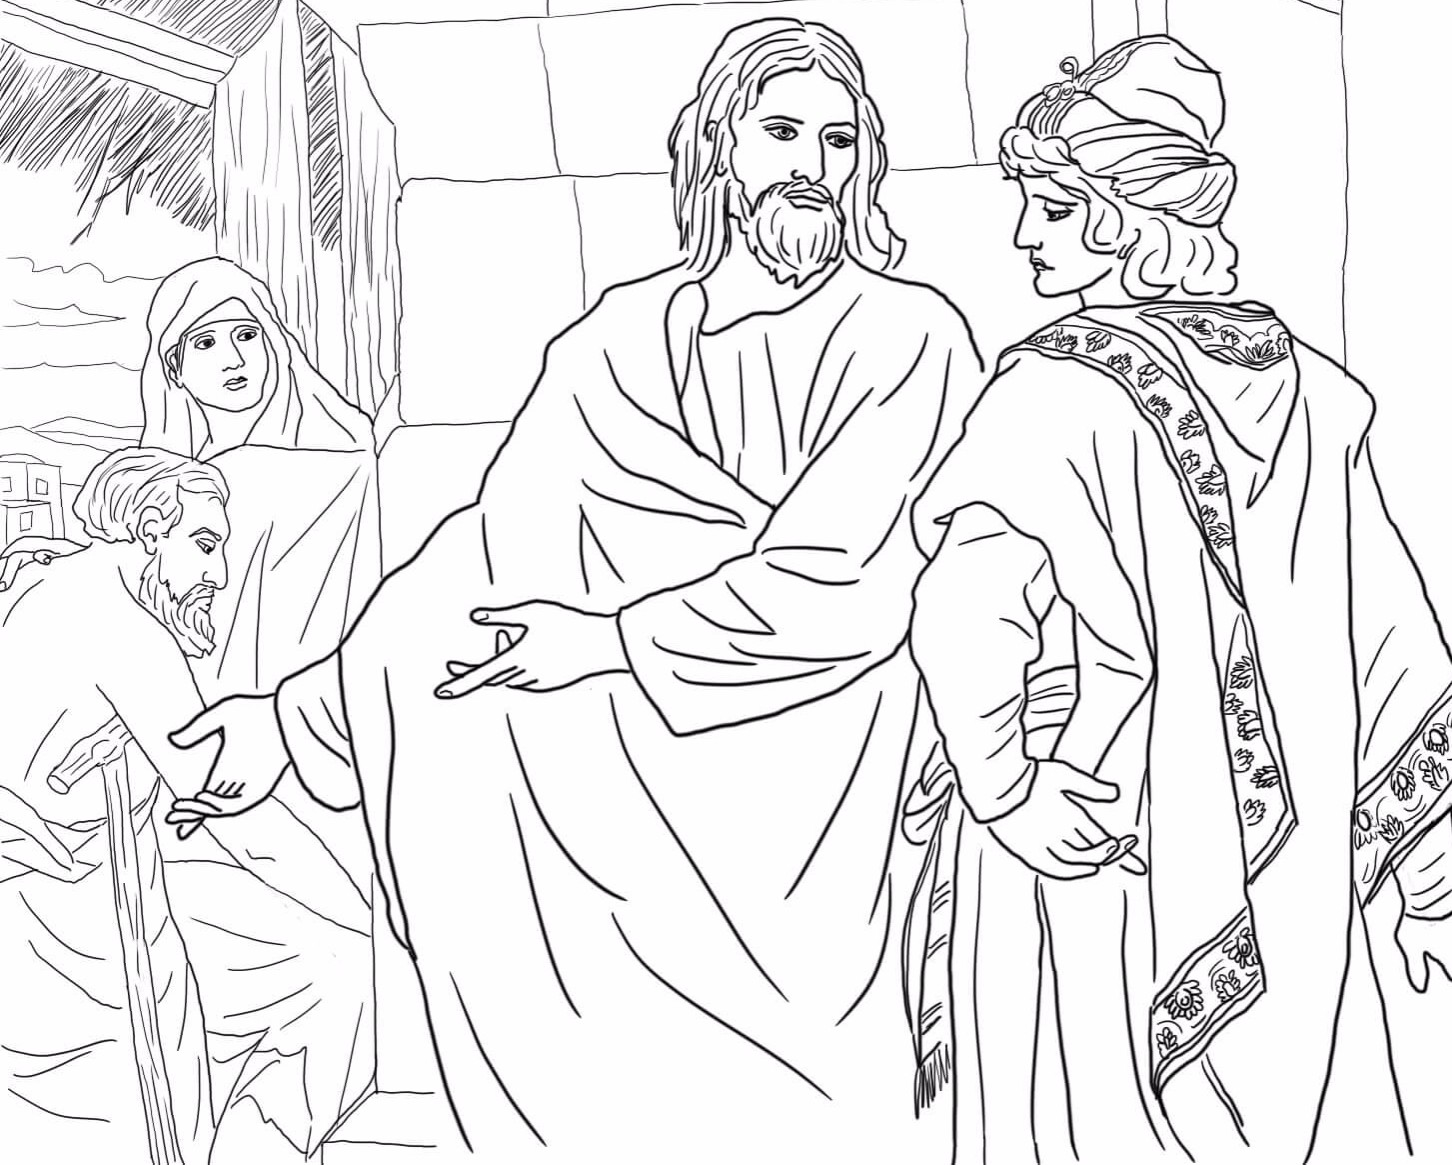 jesus-and-the-rich-young-man-by-heinrich-hofmann-coloring-page